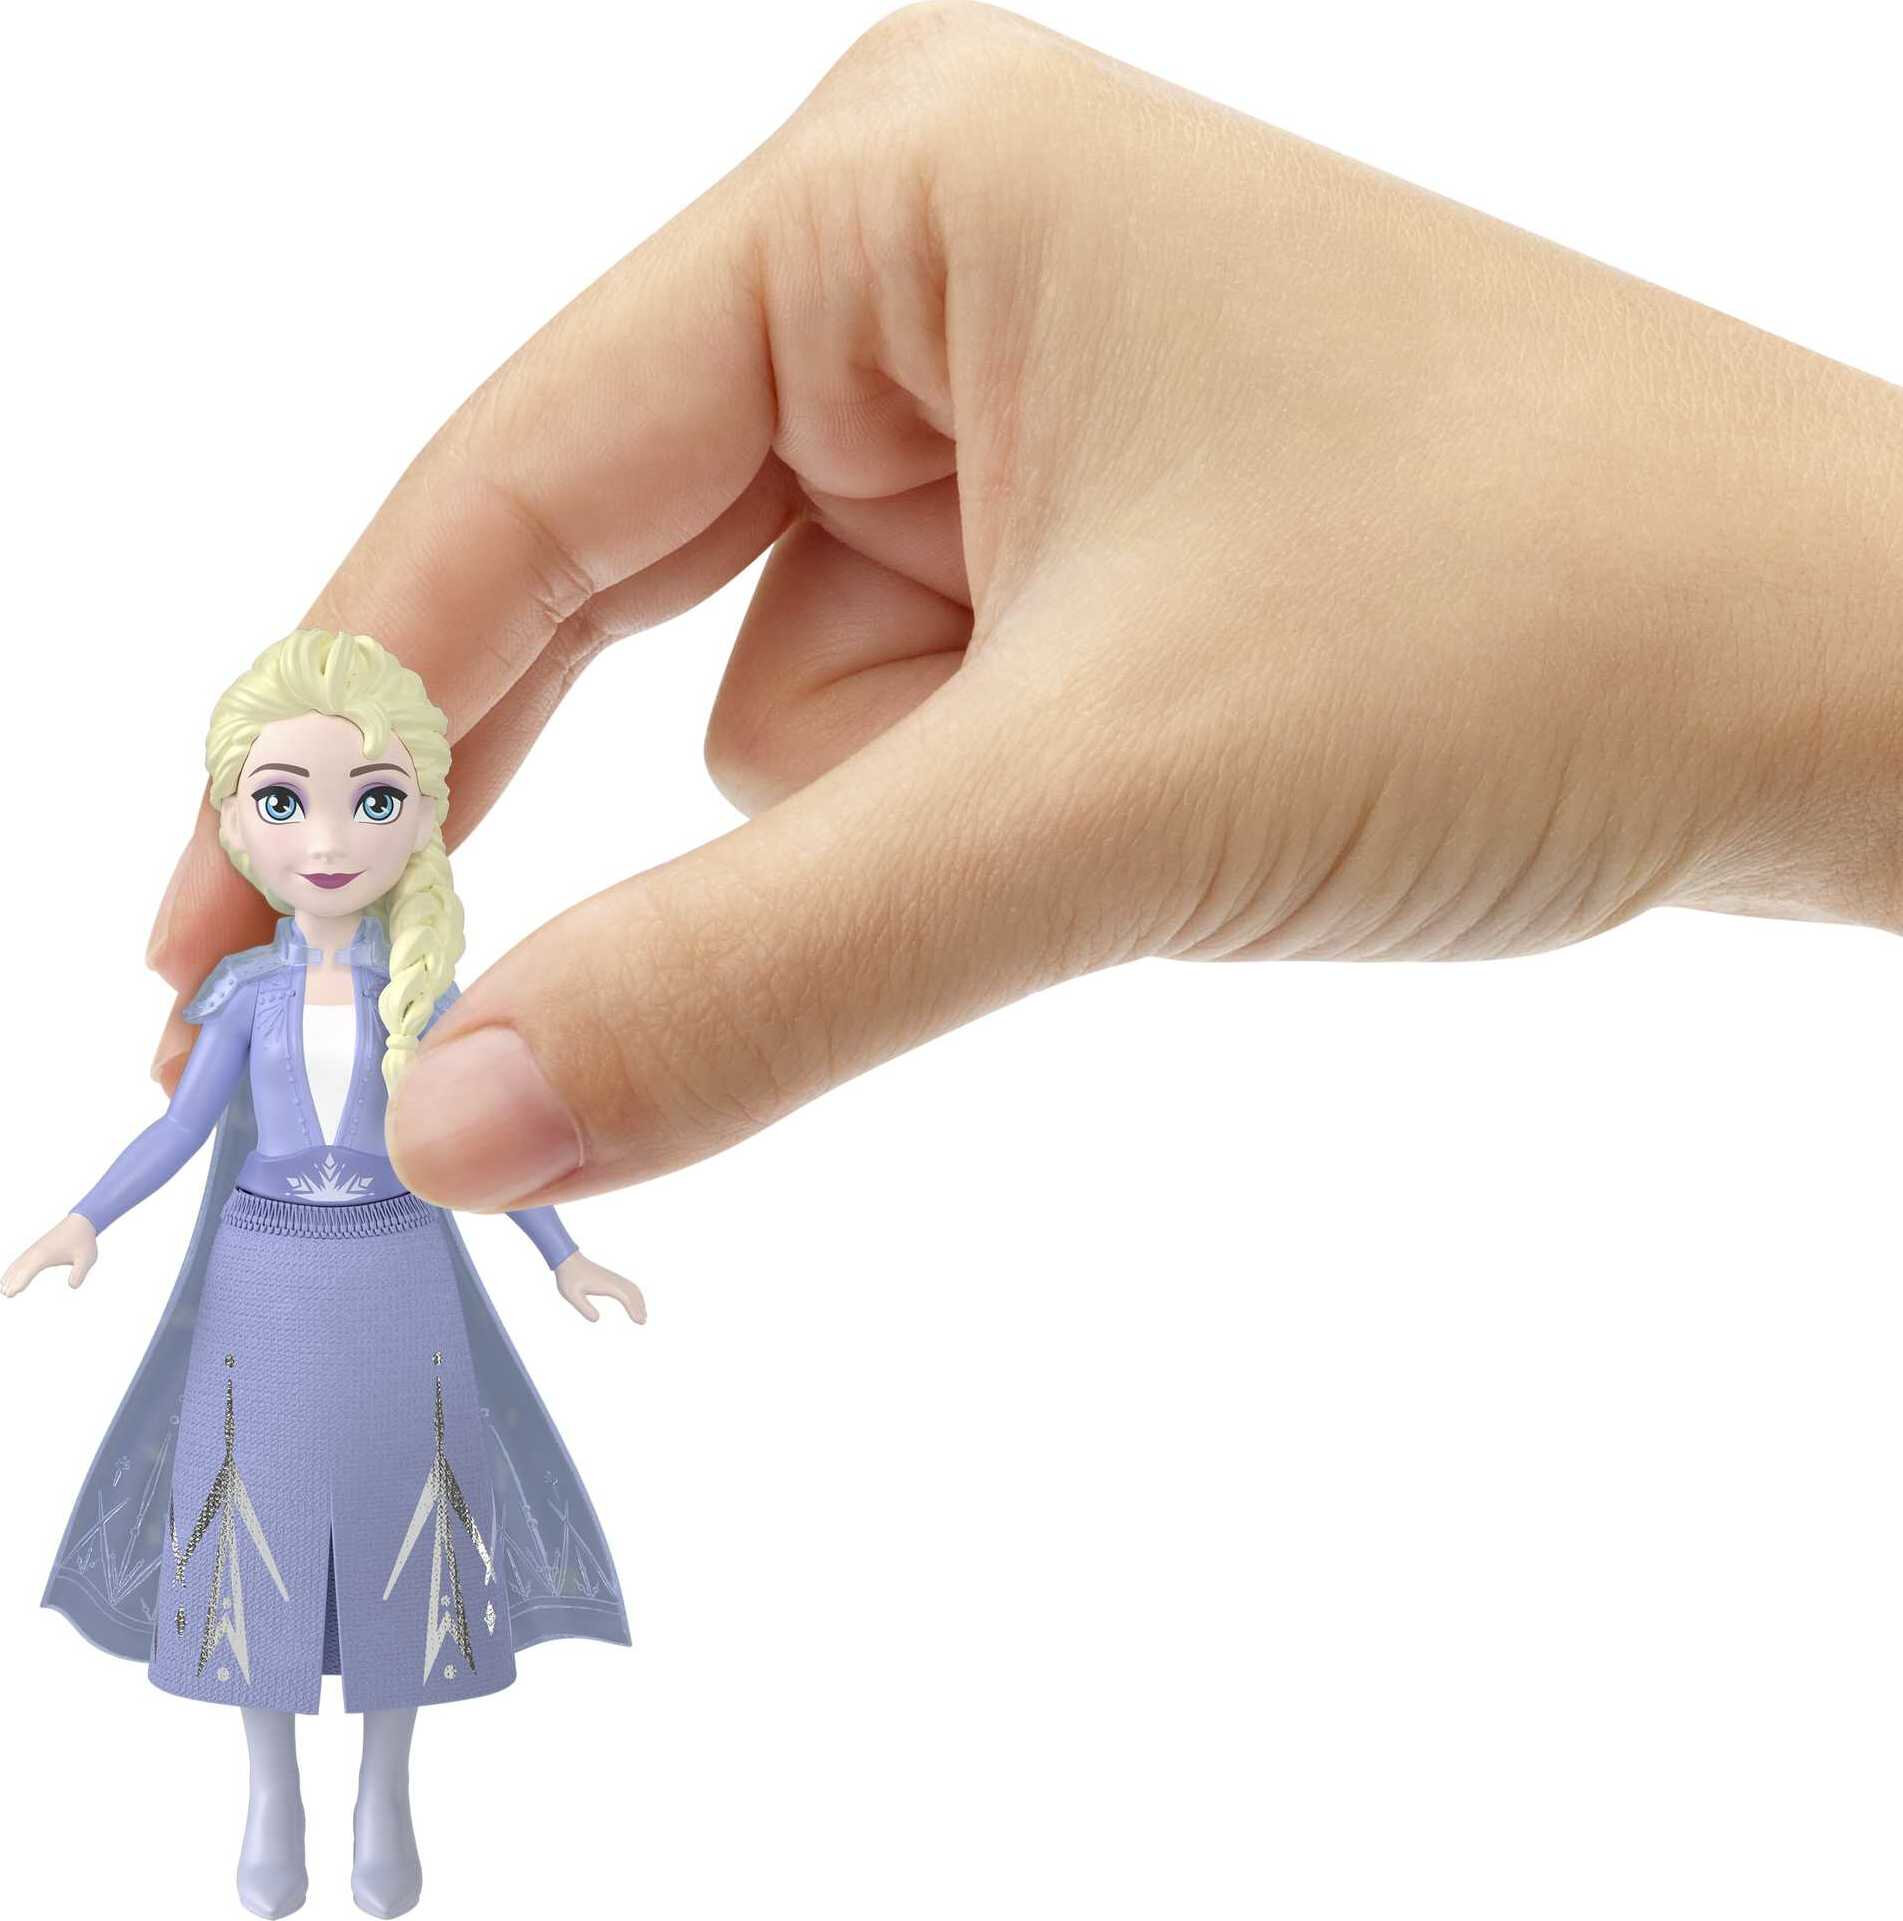 Disney Frozen Elsa Small Doll in Travel Look, Posable with Removable Cape & Skirt - image 2 of 6